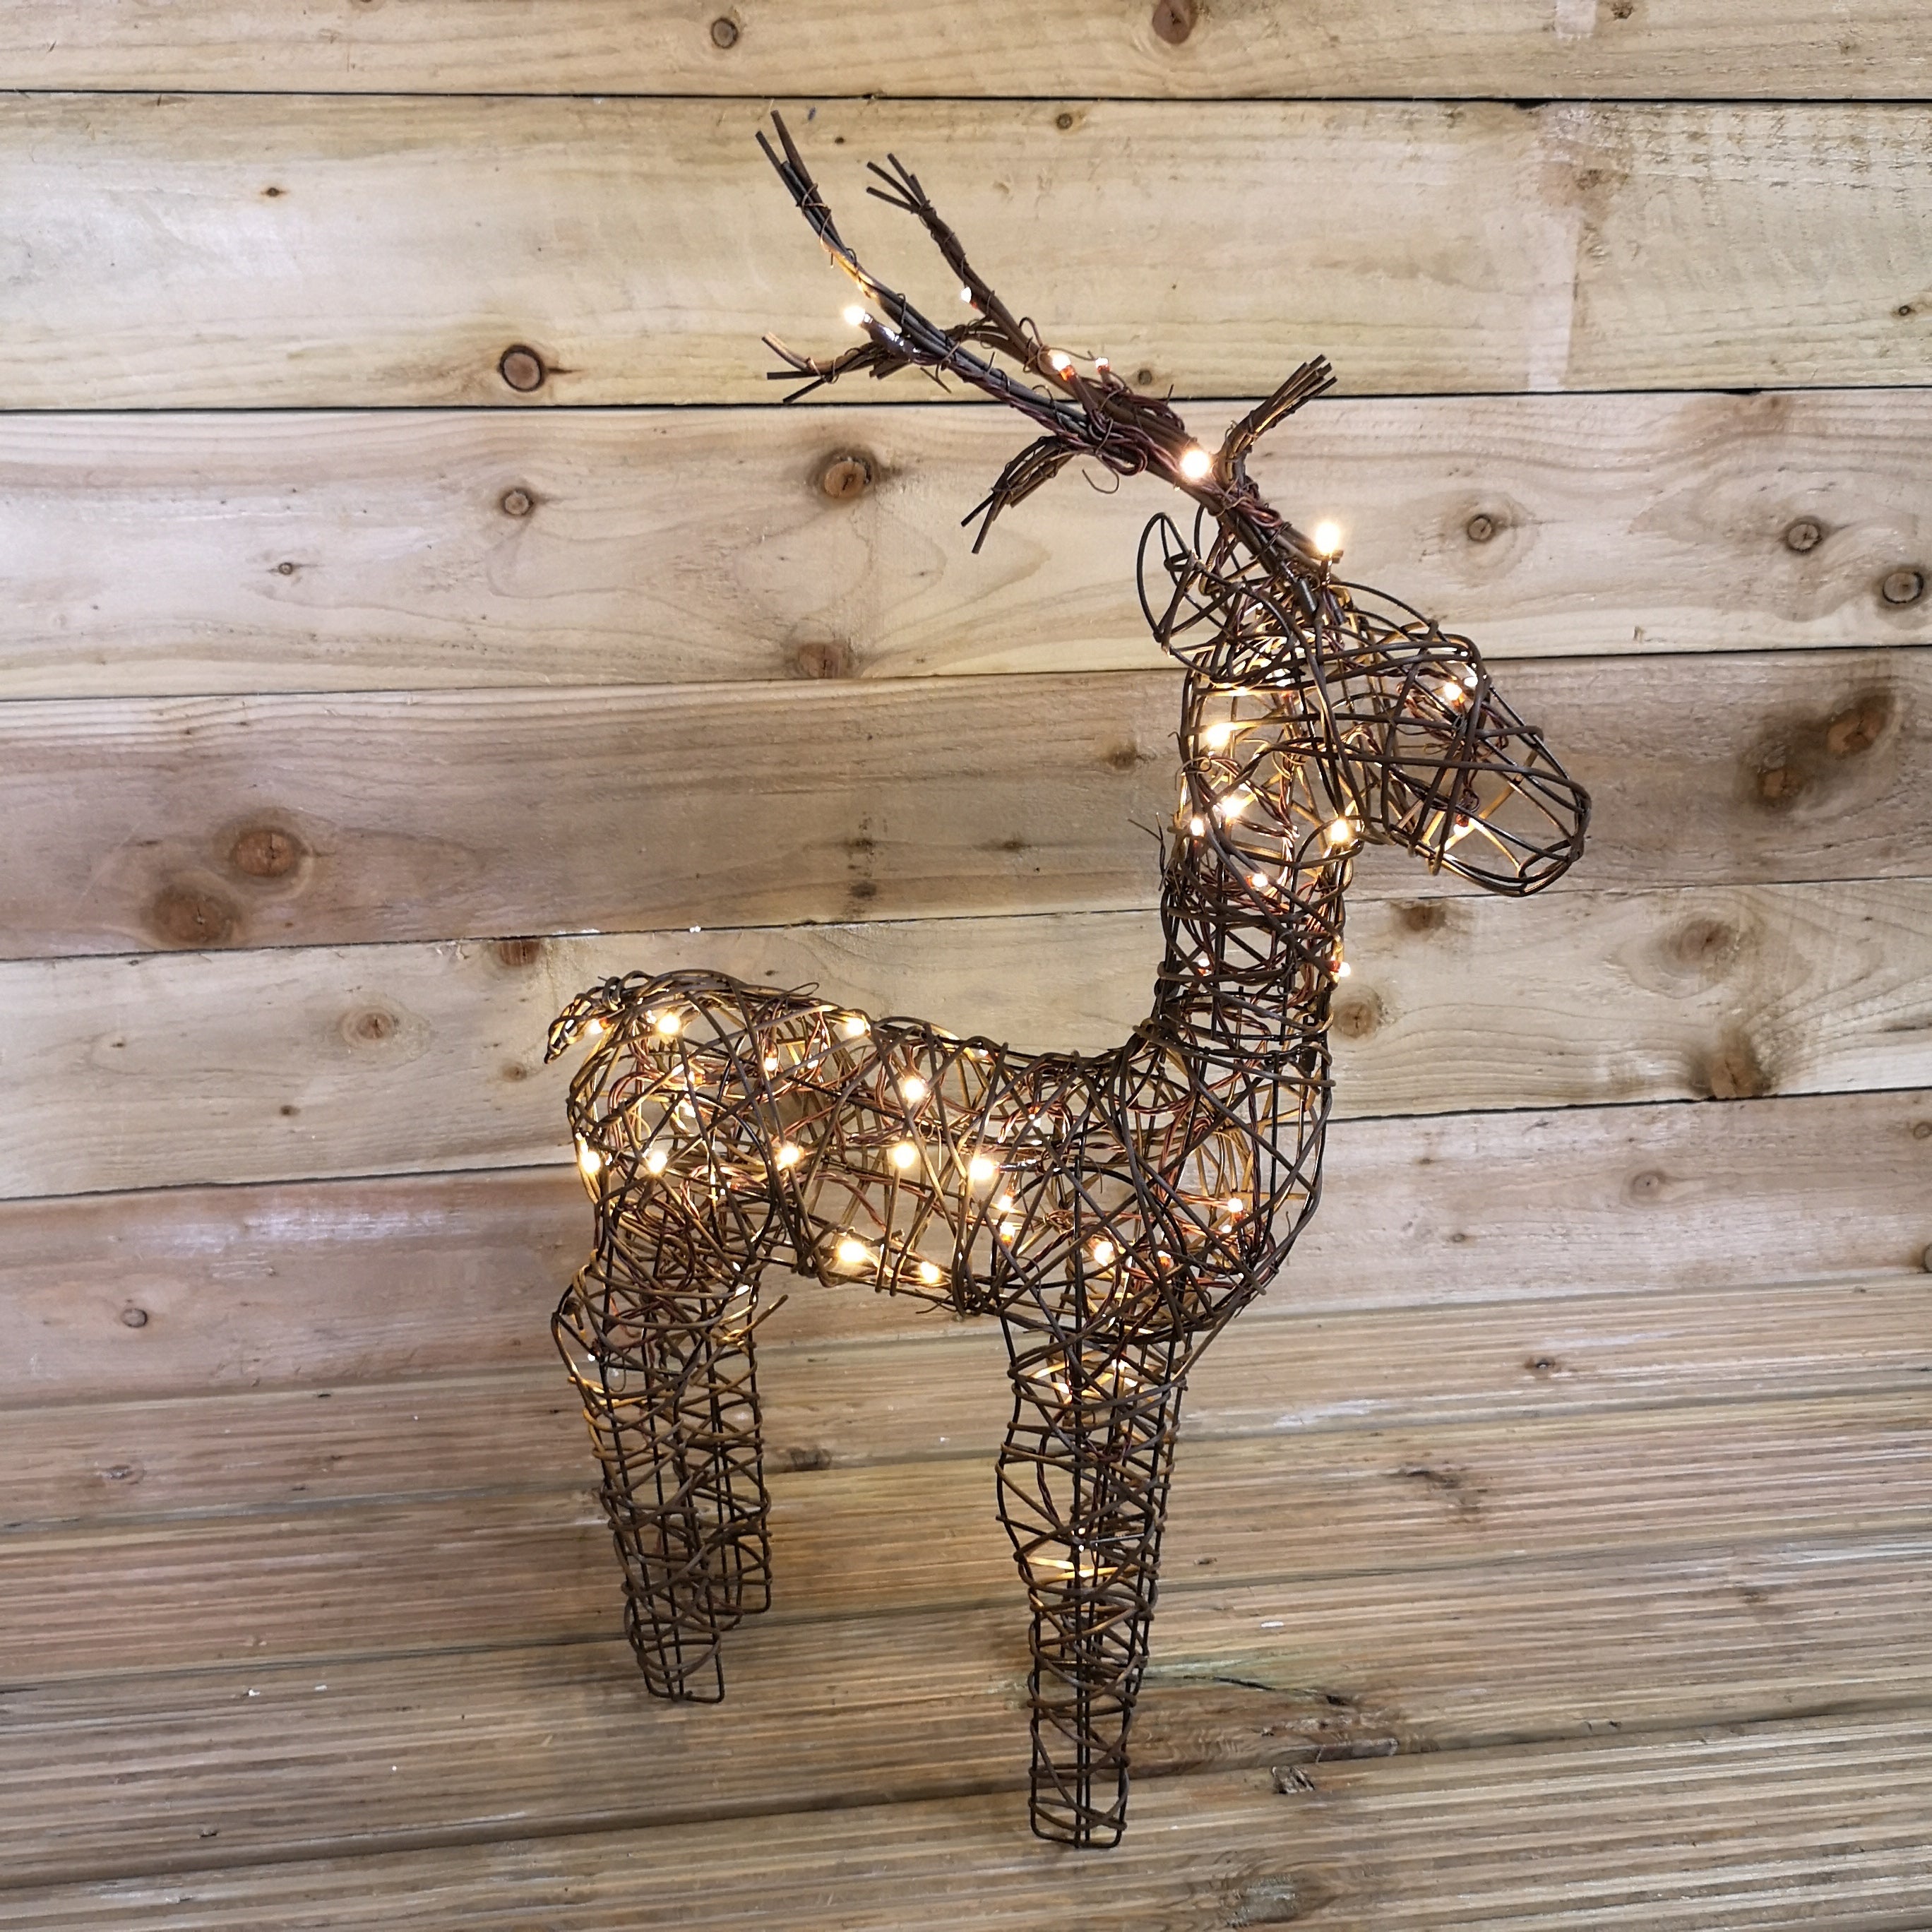 60cm Brown Outdoor Standing LED Wicker Reindeer Christmas Decoration Warm White